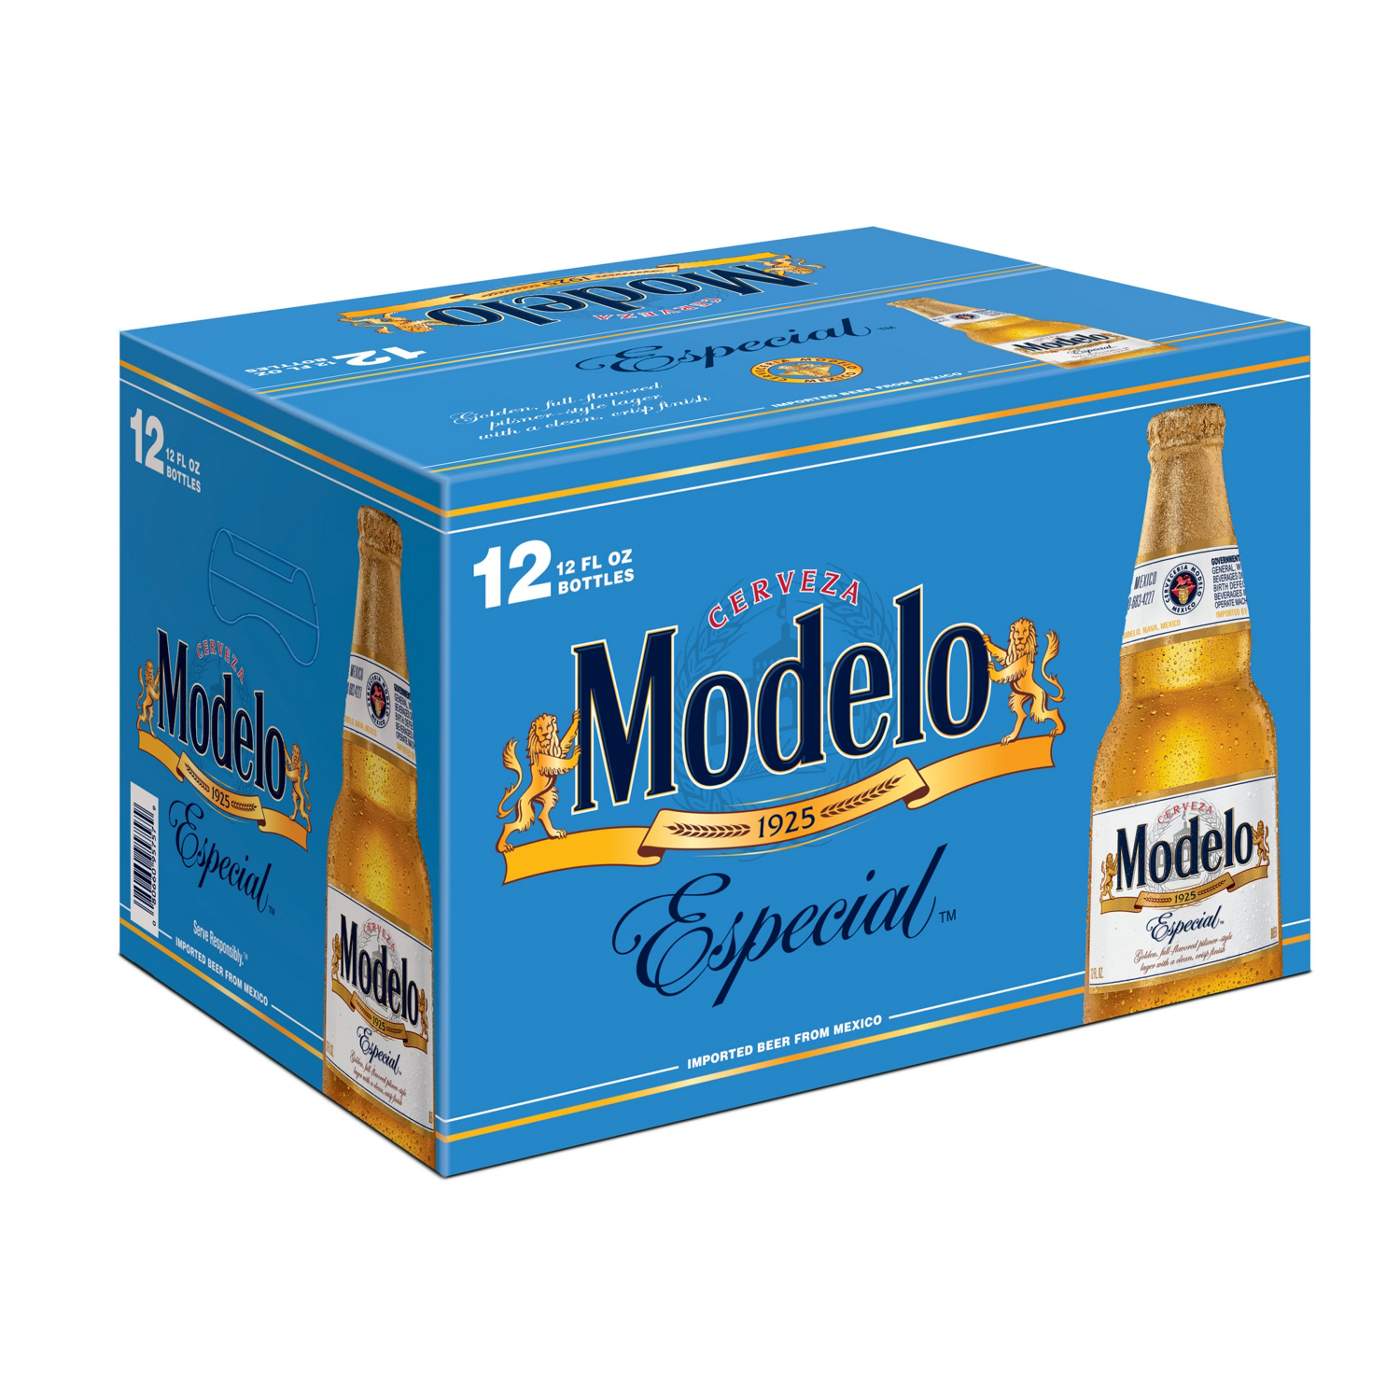 Modelo Especial Mexican Lager Import Beer 12 oz Bottles, 12 pk; image 1 of 10